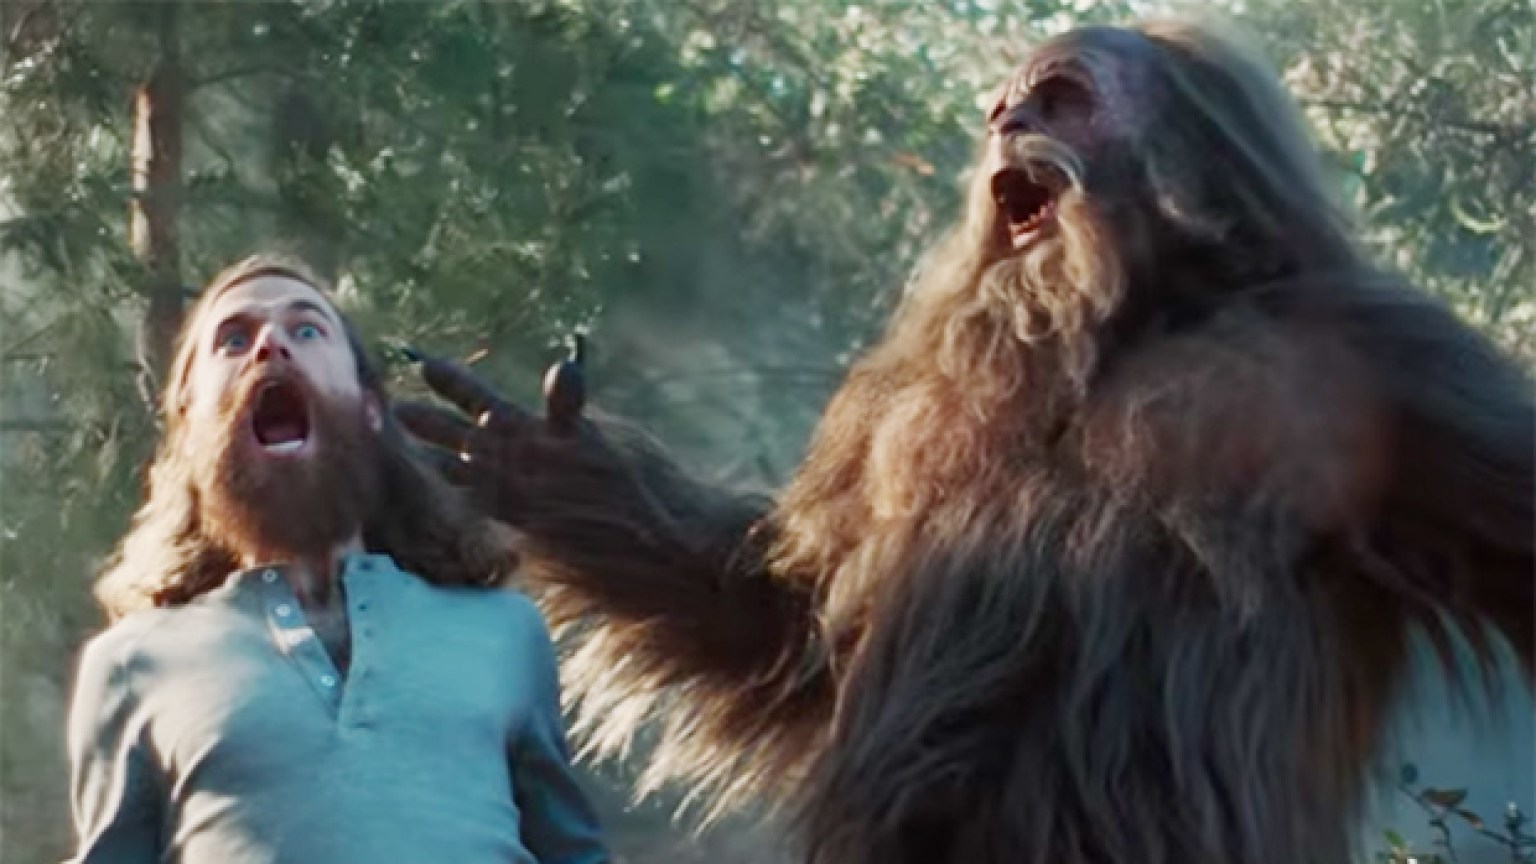 Jack Link’s Super Bowl Commercial With Sasquatch Is All Sorts Of Epic